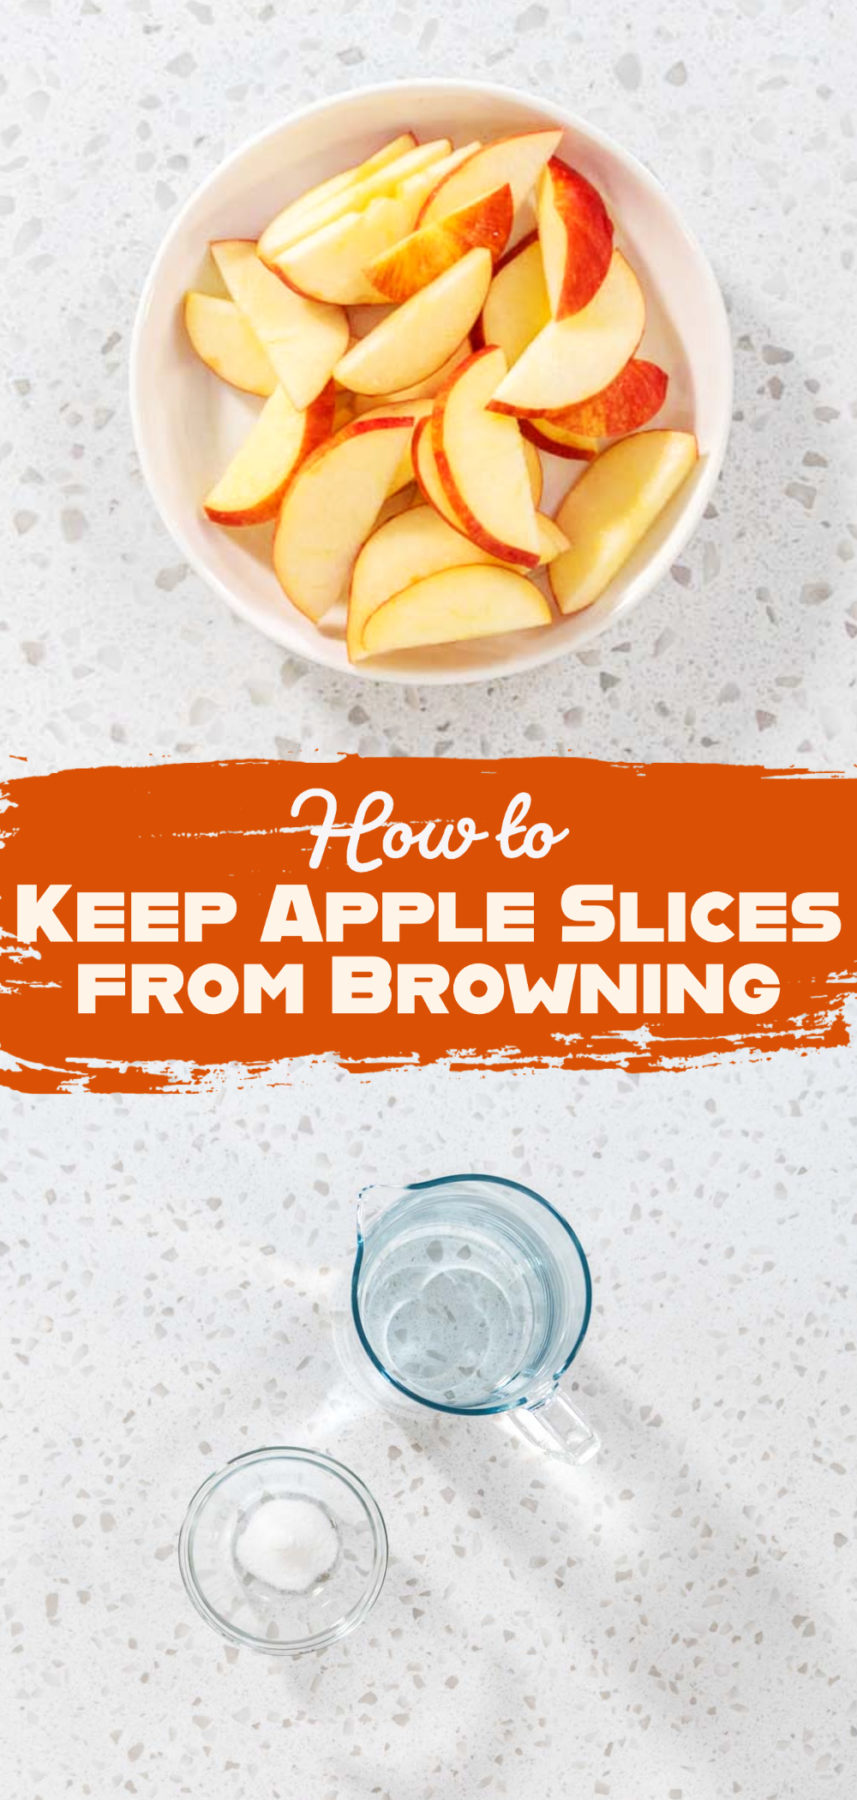 How to Keep Apple Slices from Browning